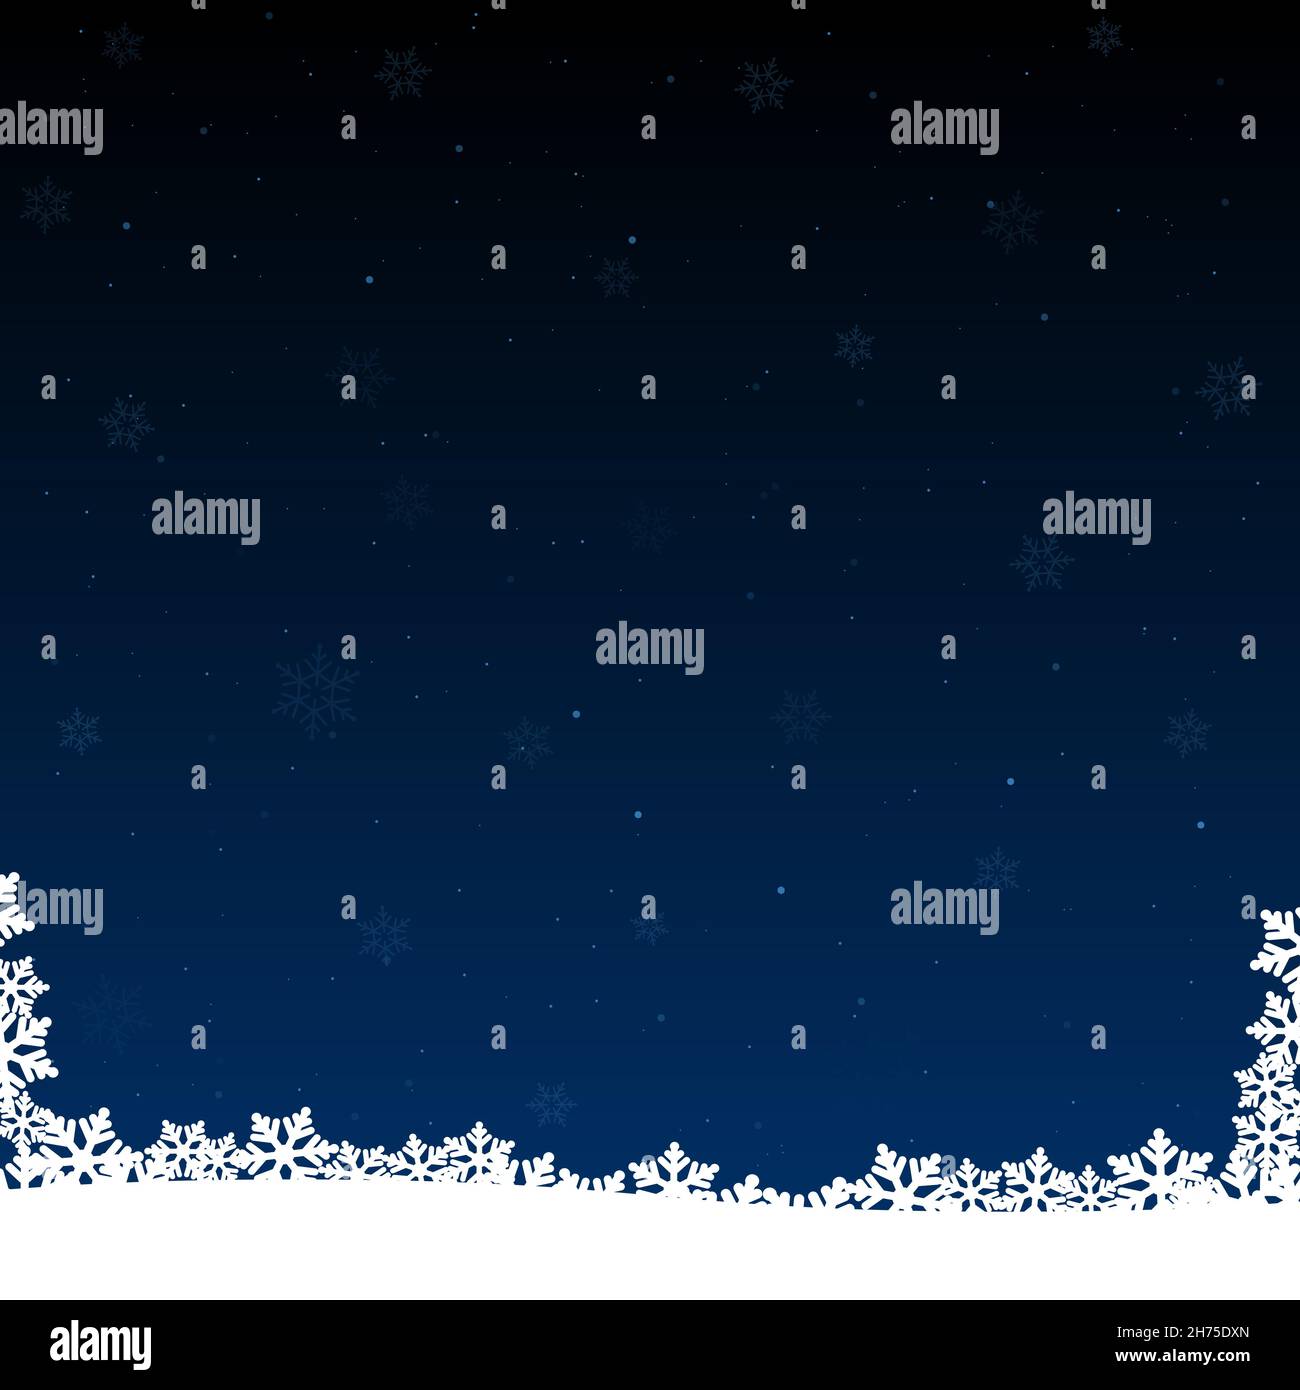 White color snow on dark blue background and snowflakes at the bottom christmas background. Vector stock illustration. Stock Vector